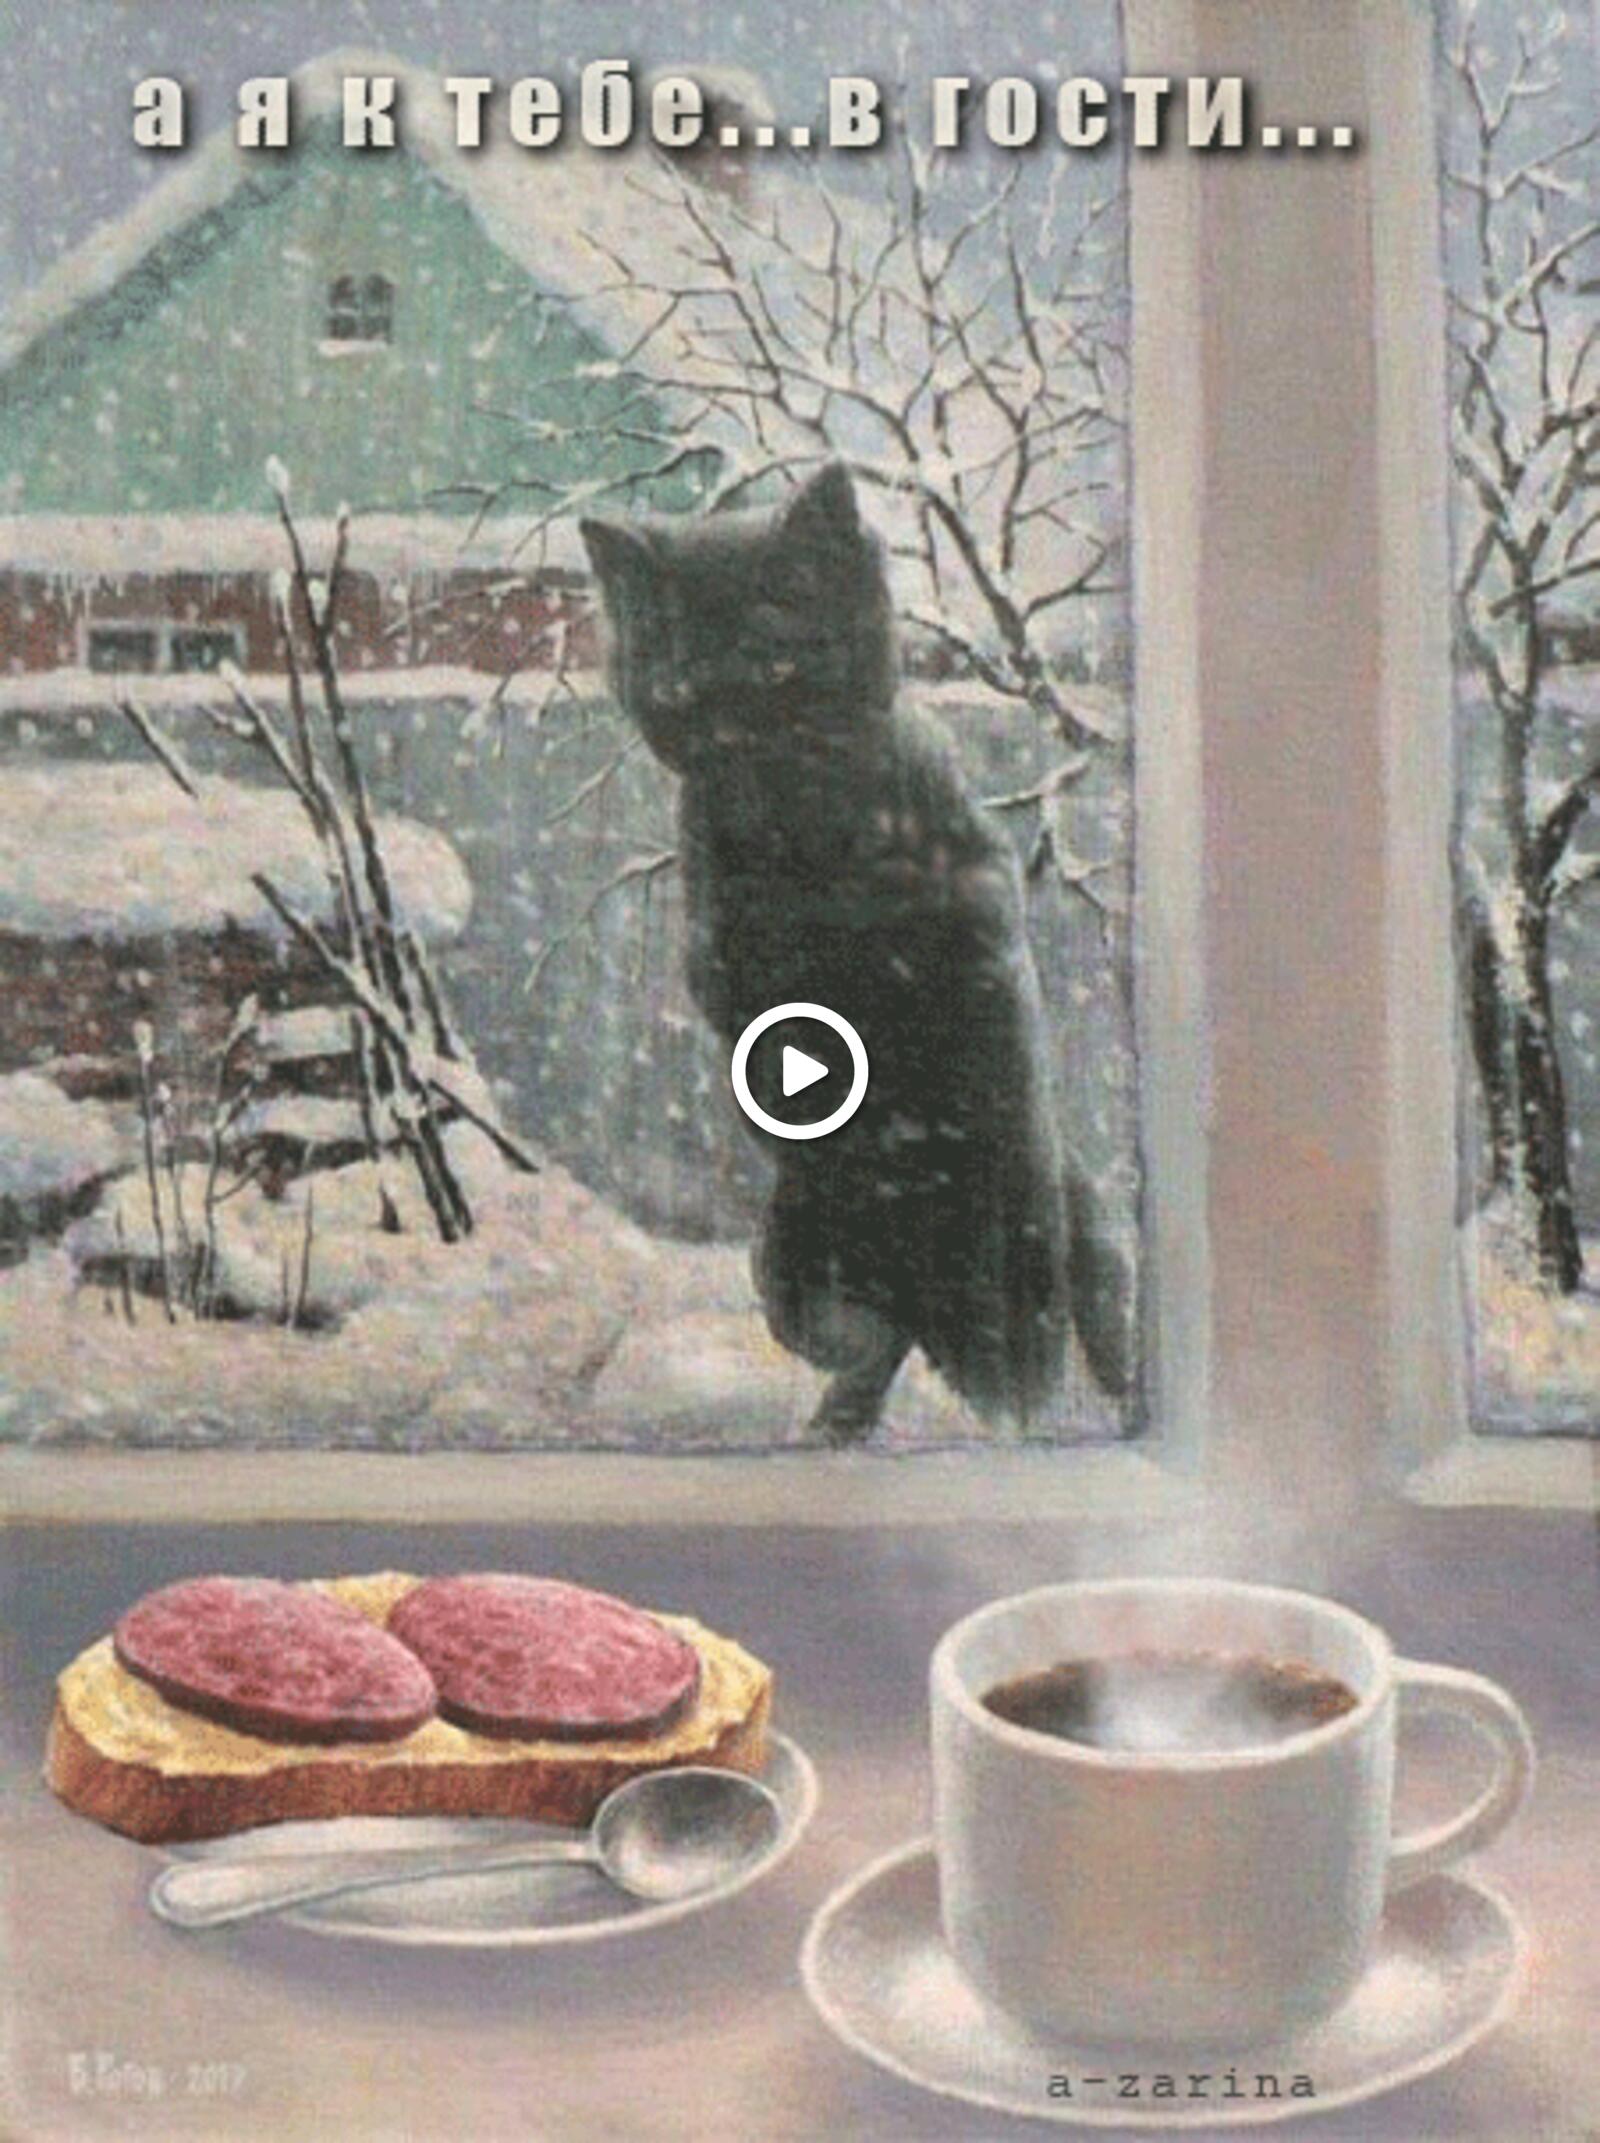 A postcard on the subject of window cat winter for free